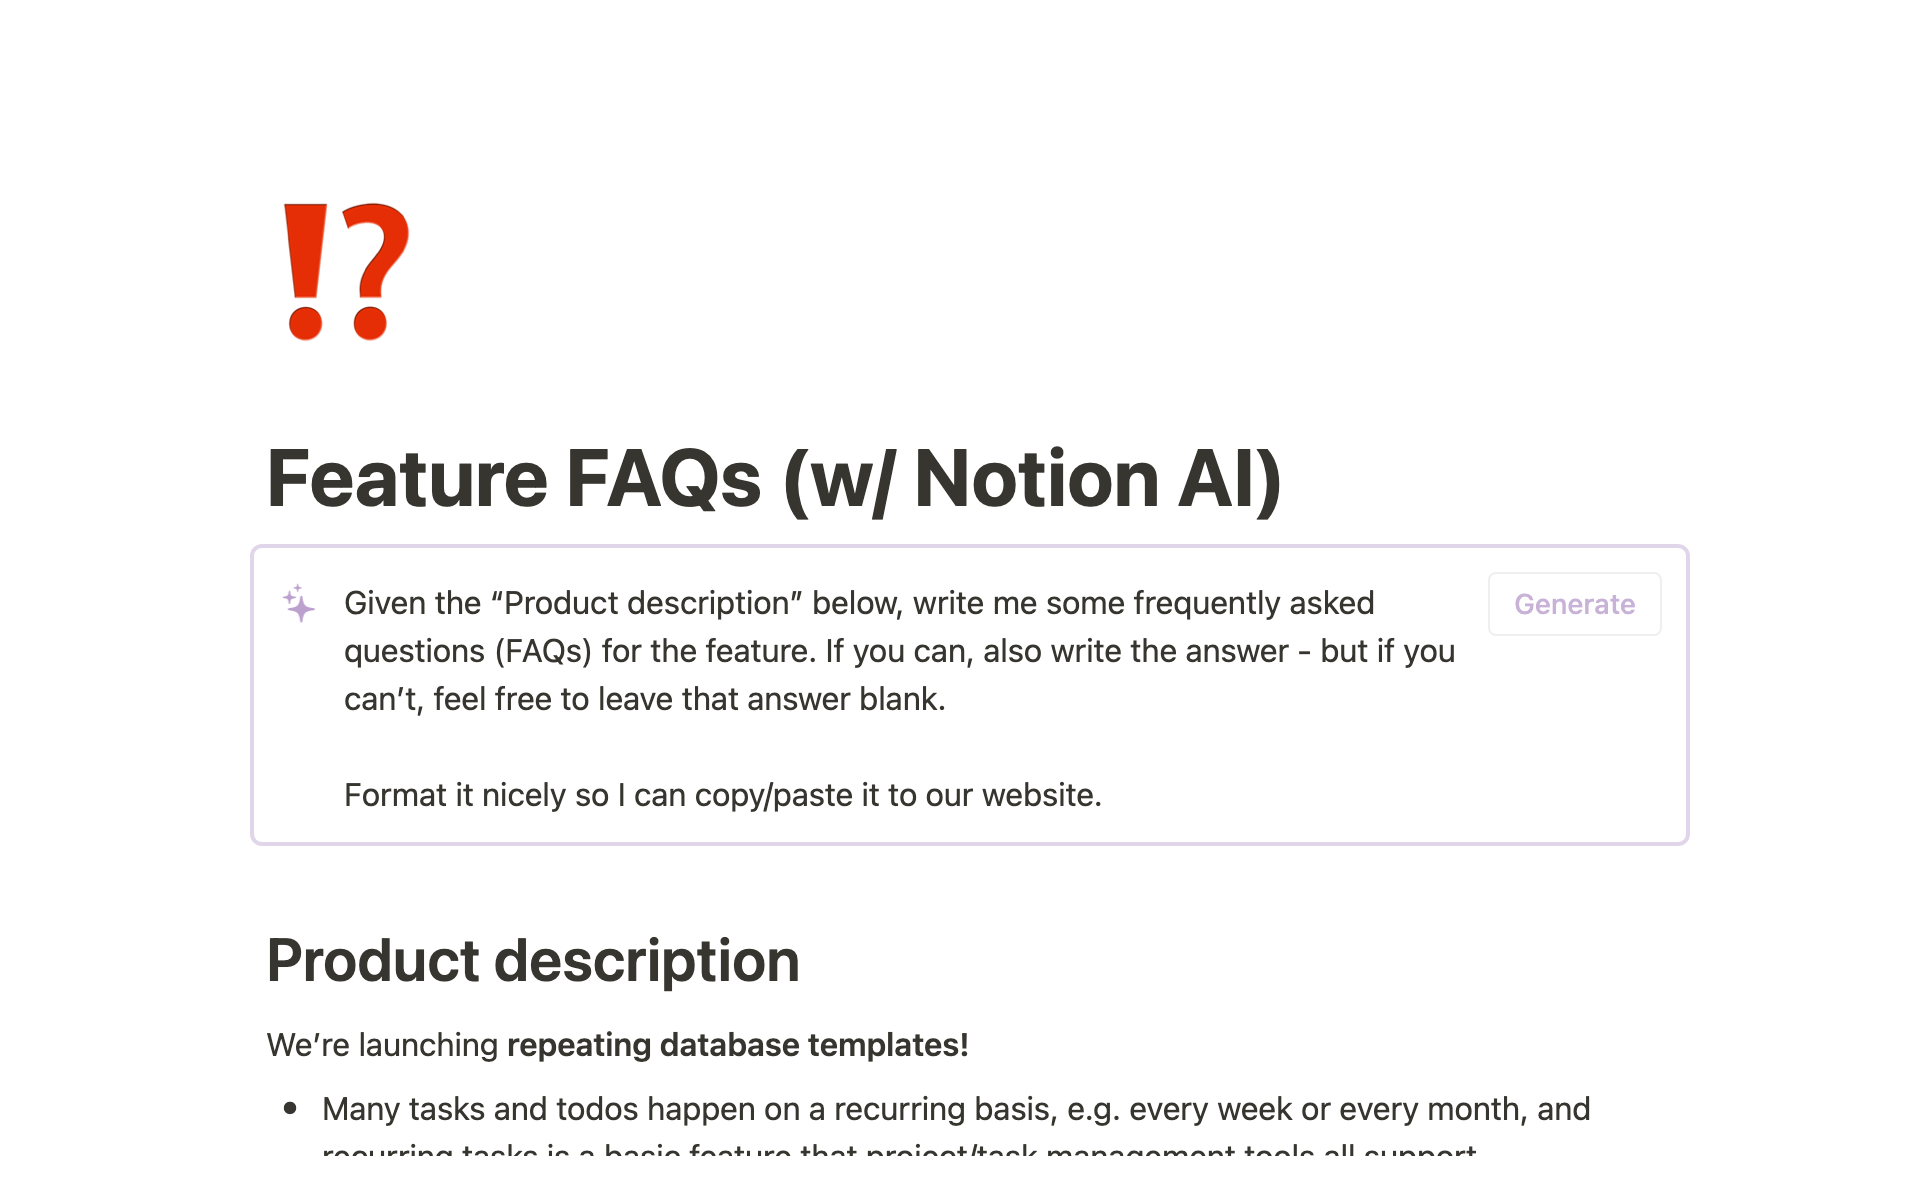 When you launch a new feature, your customers are going to have a lot of questions. Let Notion AI brainstorm ideas for you.